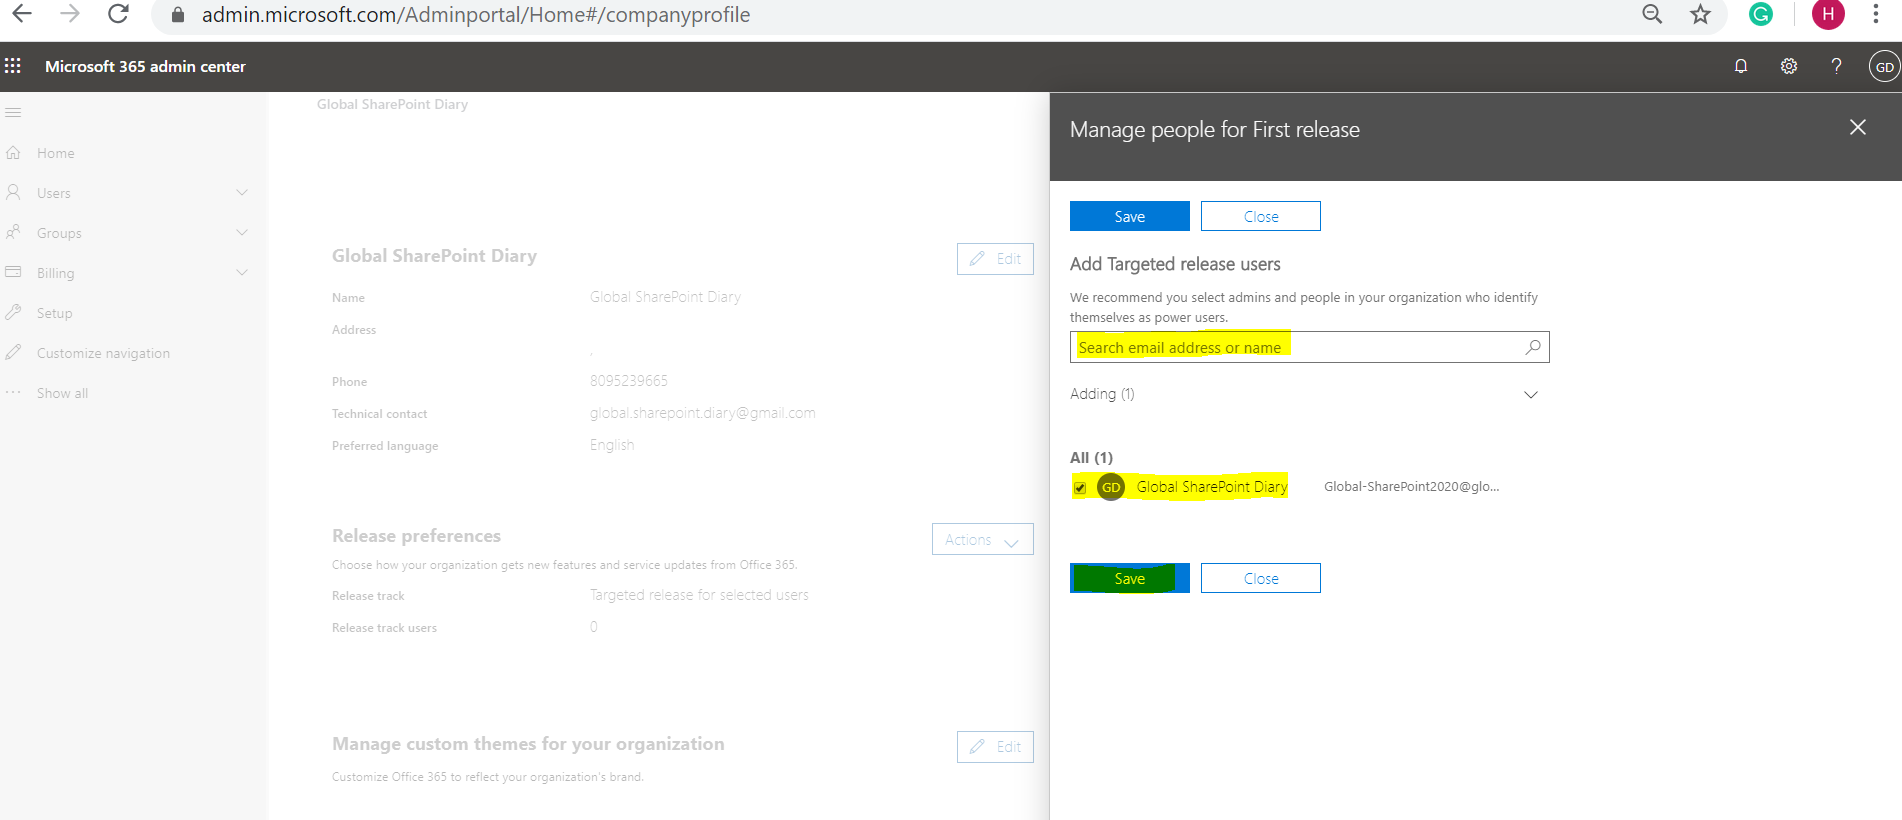 SharePoint search box - Add Targeted release users - Release Preferences in Office 365 - Organization Profile